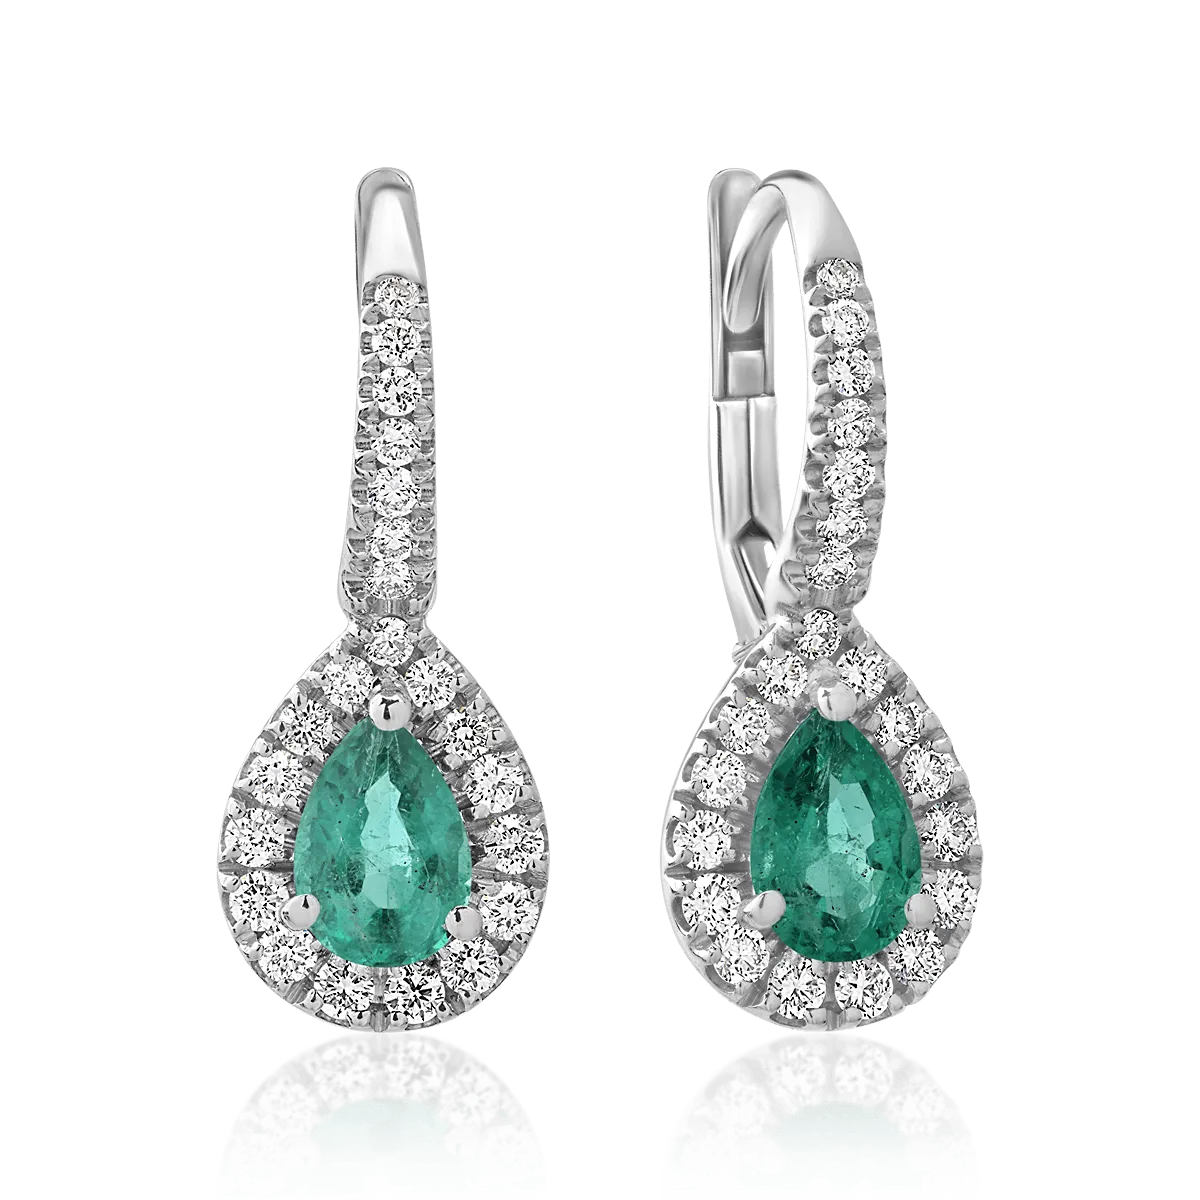 18K white gold earrings with 0.71ct emeralds and 0.36ct diamonds